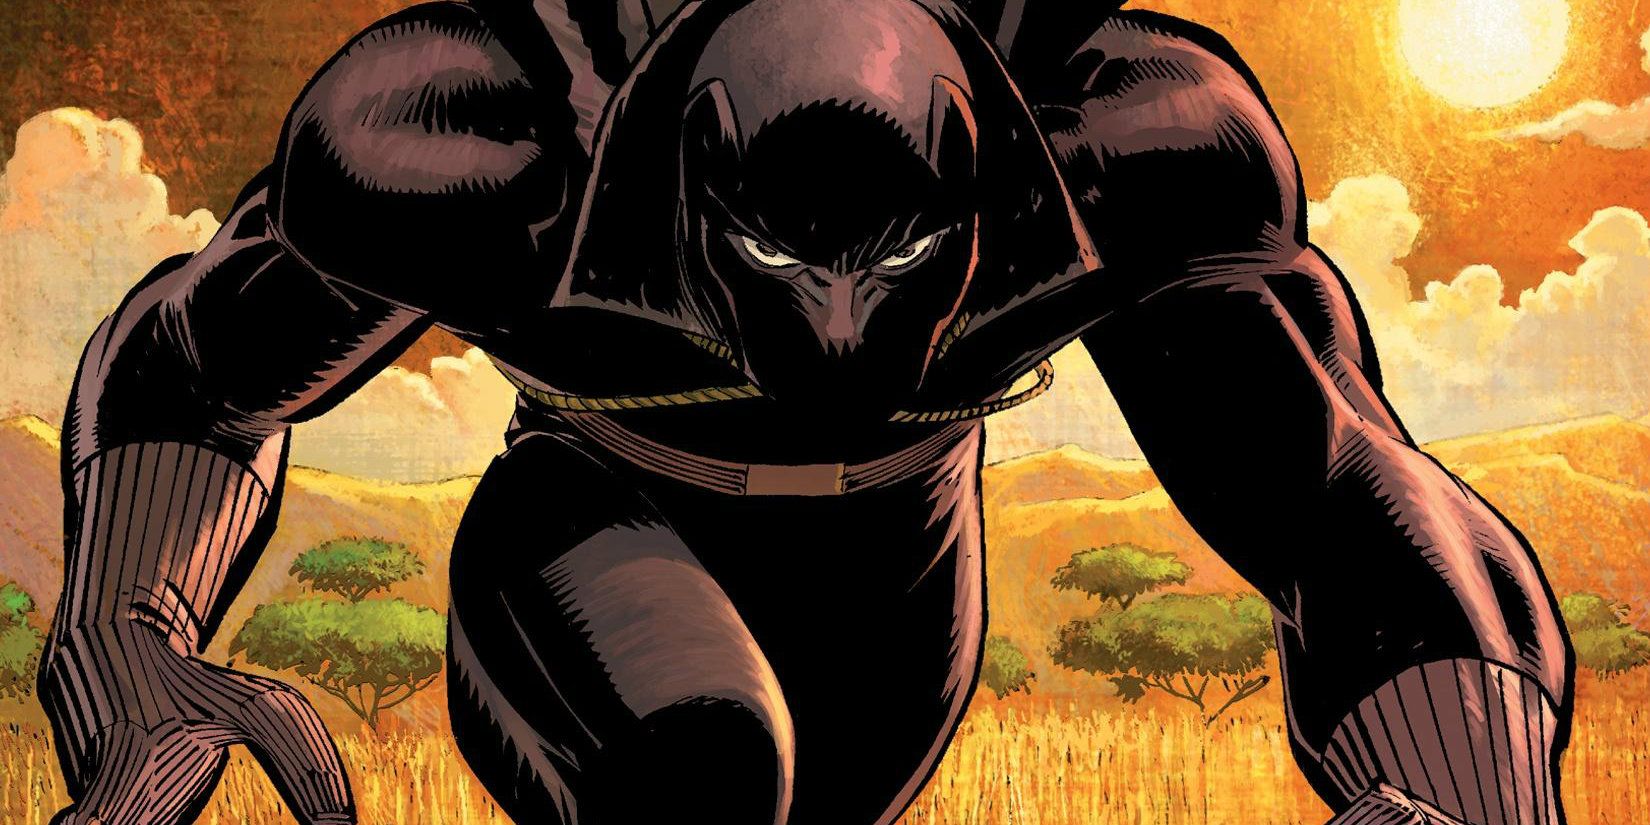 Black Panther hunched as if stalking his prey